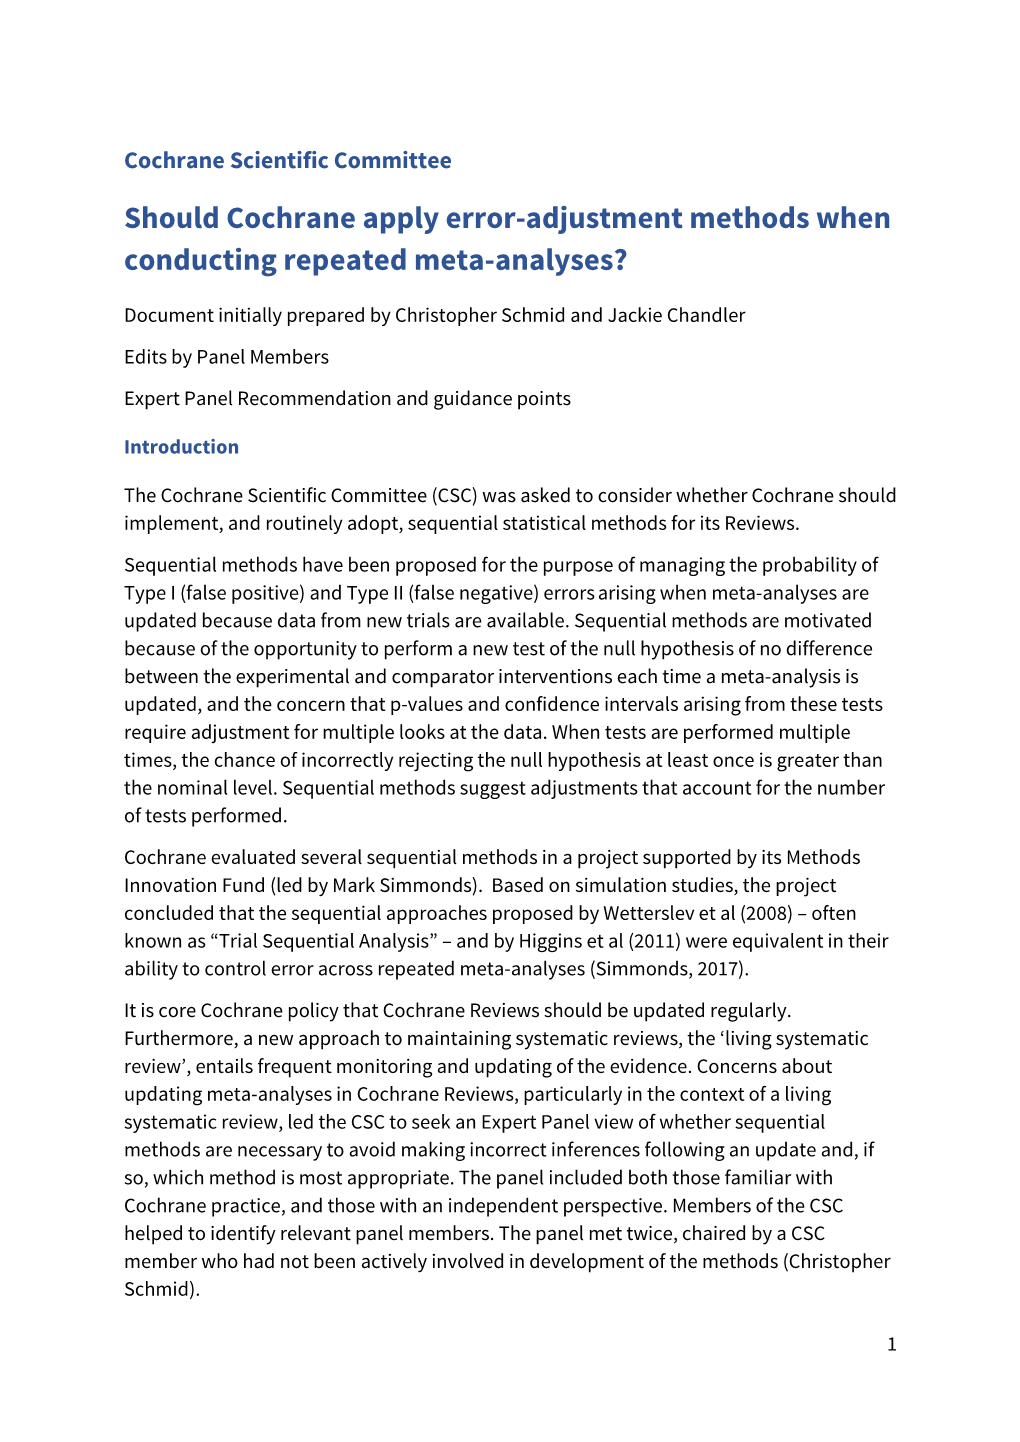 Should Cochrane Apply Error-Adjustment Methods When Conducting Repeated Meta-Analyses?